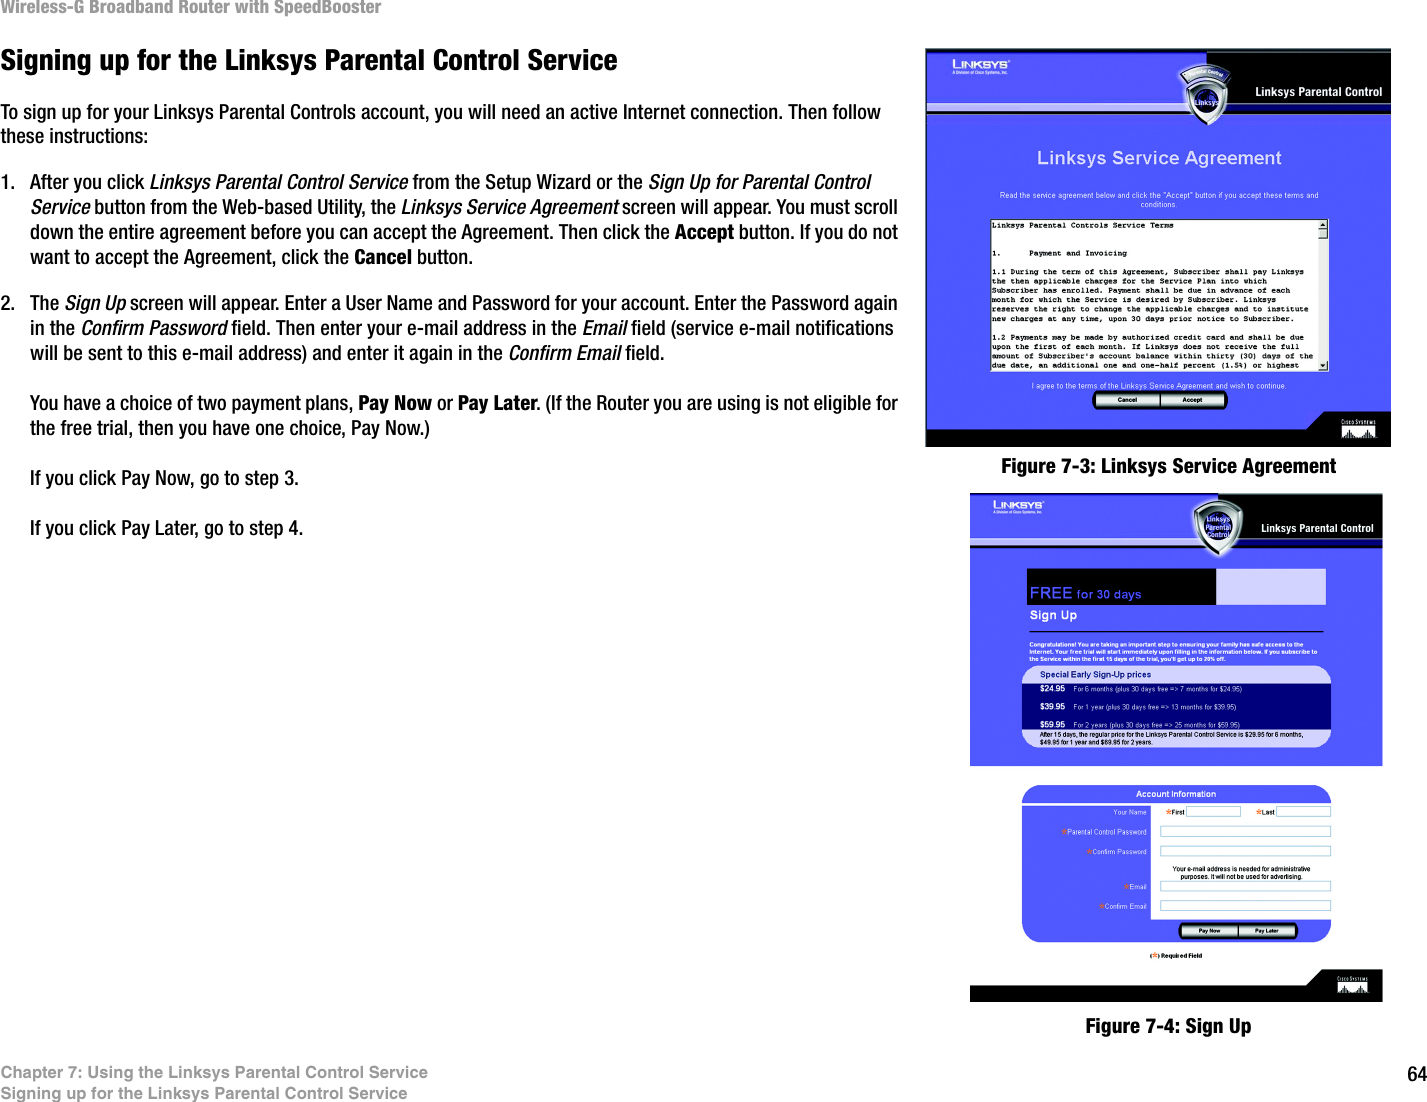 64Chapter 7: Using the Linksys Parental Control ServiceSigning up for the Linksys Parental Control ServiceWireless-G Broadband Router with SpeedBoosterSigning up for the Linksys Parental Control ServiceTo sign up for your Linksys Parental Controls account, you will need an active Internet connection. Then follow these instructions:1. After you click Linksys Parental Control Service from the Setup Wizard or the Sign Up for Parental Control Service button from the Web-based Utility, the Linksys Service Agreement screen will appear. You must scroll down the entire agreement before you can accept the Agreement. Then click the Accept button. If you do not want to accept the Agreement, click the Cancel button.2. The Sign Up screen will appear. Enter a User Name and Password for your account. Enter the Password again in the Confirm Password field. Then enter your e-mail address in the Email field (service e-mail notifications will be sent to this e-mail address) and enter it again in the Confirm Email field.You have a choice of two payment plans, Pay Now or Pay Later. (If the Router you are using is not eligible for the free trial, then you have one choice, Pay Now.)If you click Pay Now, go to step 3.If you click Pay Later, go to step 4.Figure 7-4: Sign UpFigure 7-3: Linksys Service Agreement